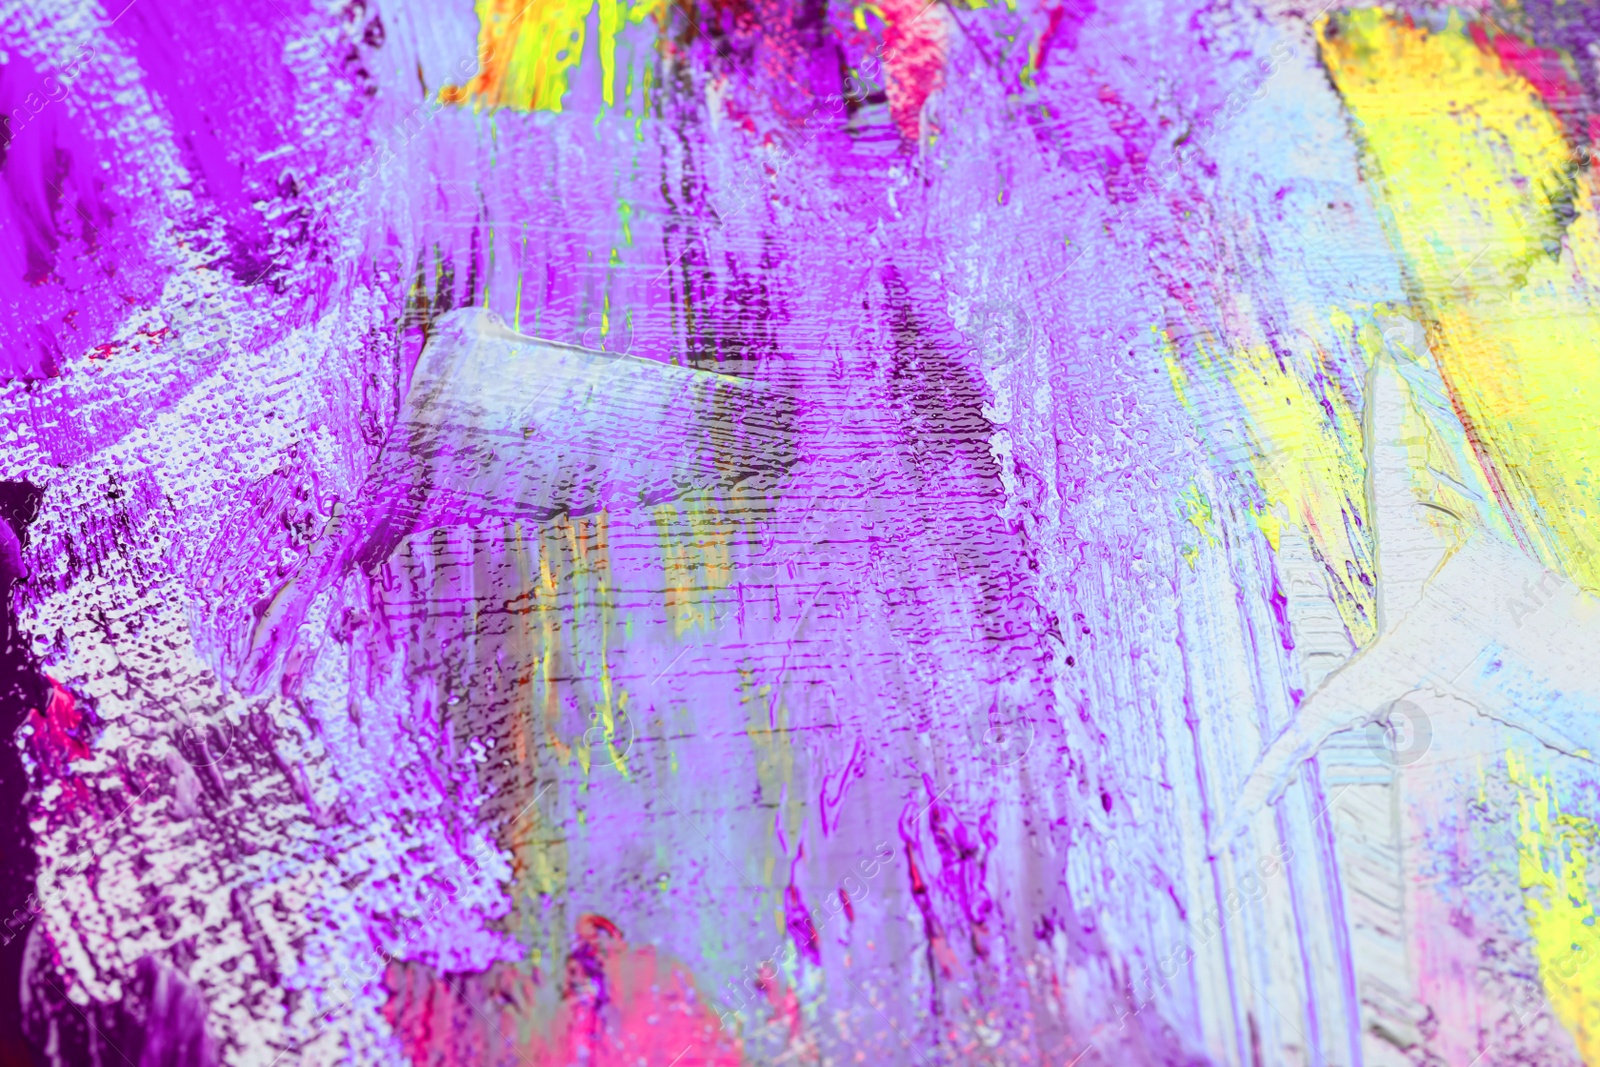 Image of Strokes of colorful acrylic paints on canvas, closeup